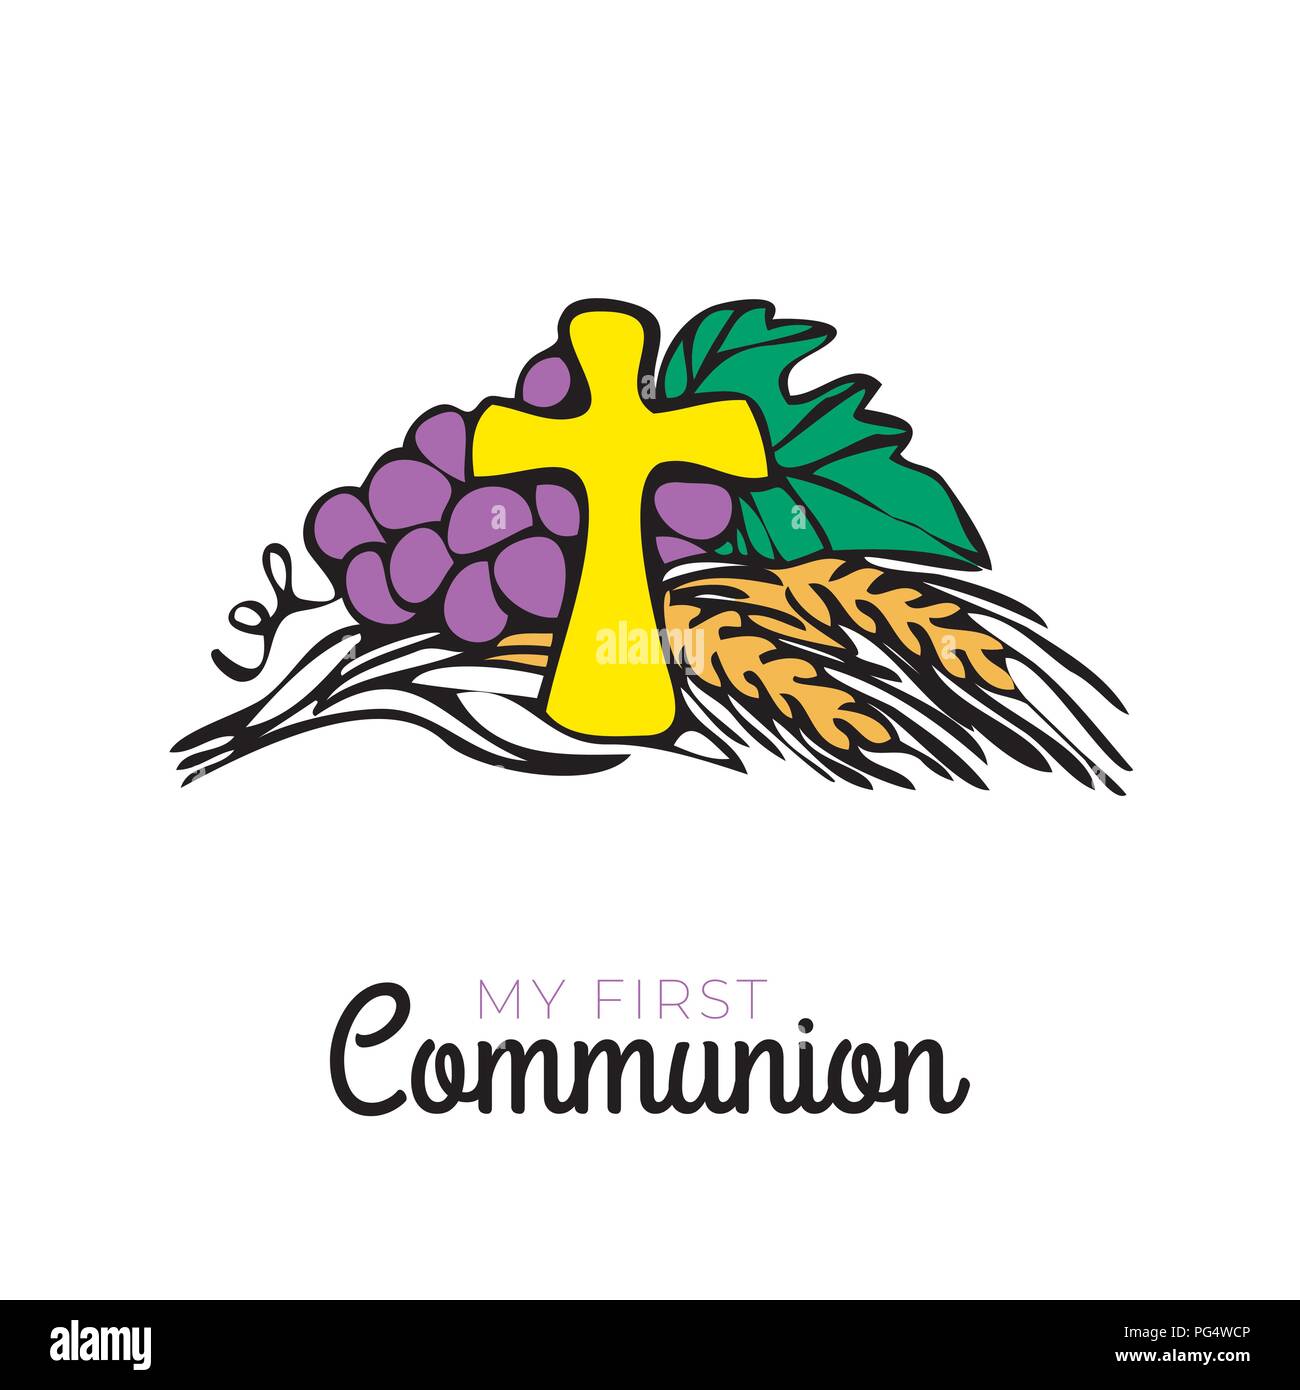 First communion symbols for a nice invitation design. Church and Christian Community Flat Illustration Stock Vector